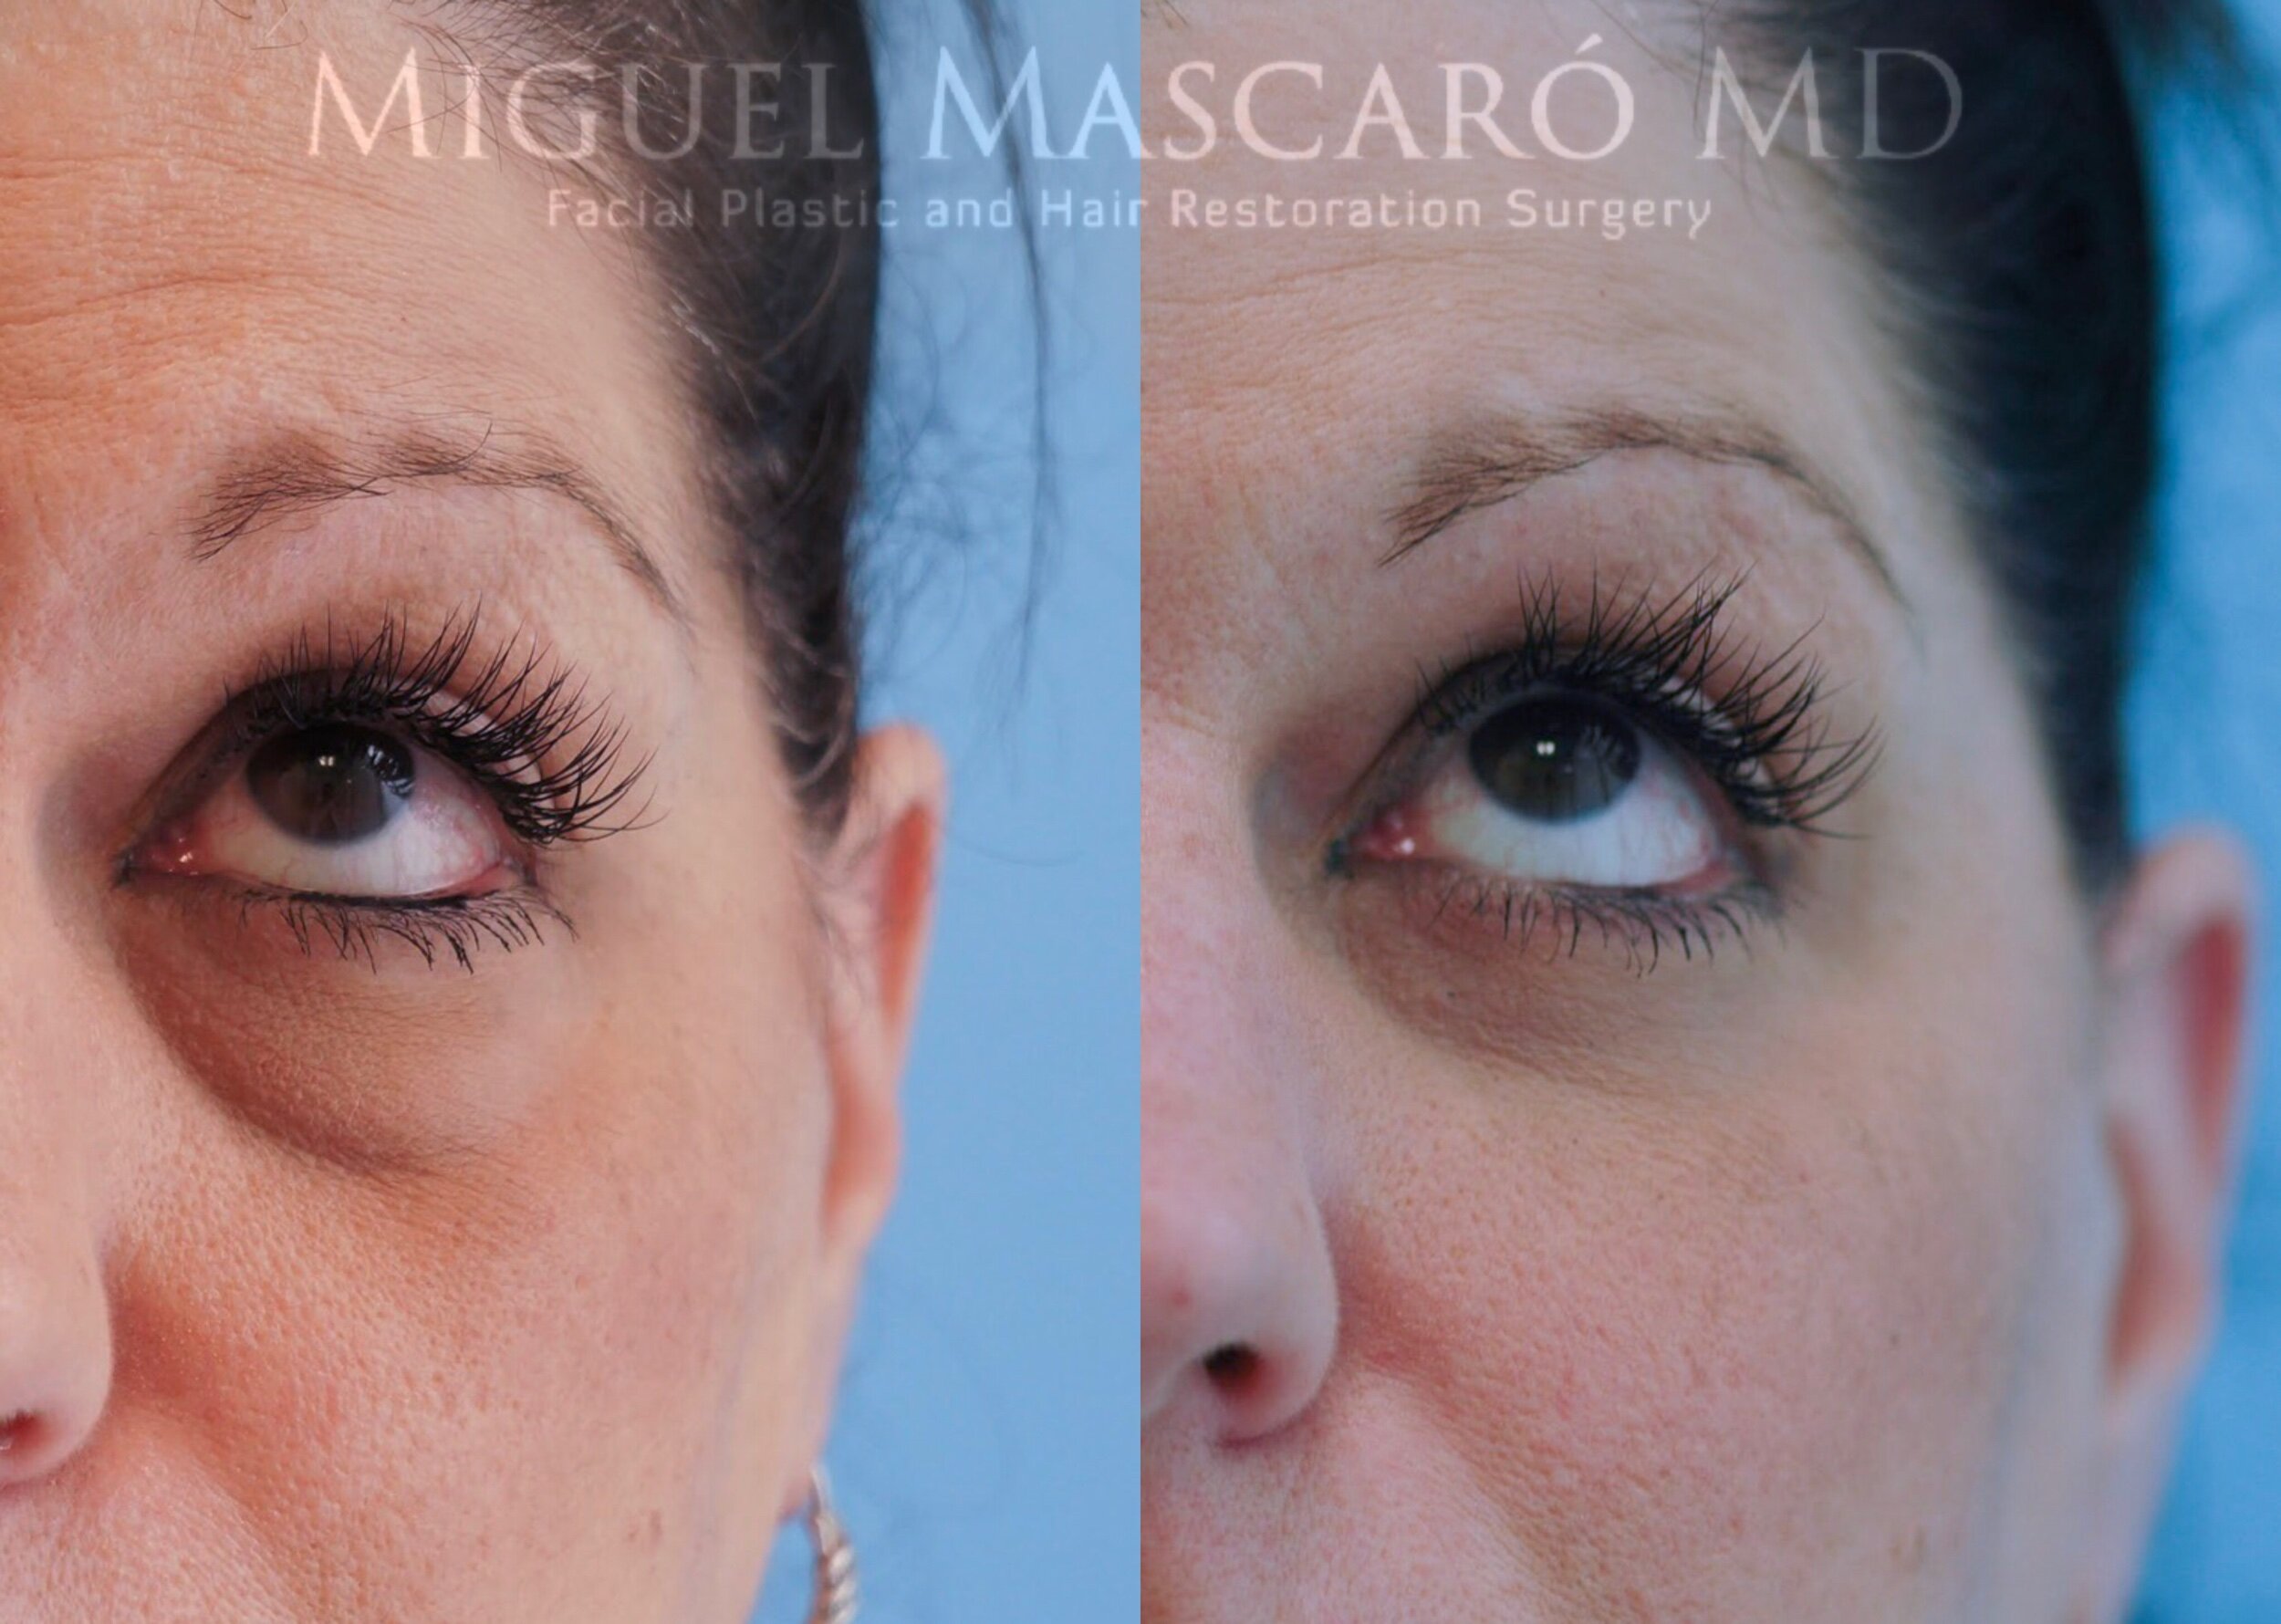  Lower blepharoplasty with fat transfer   